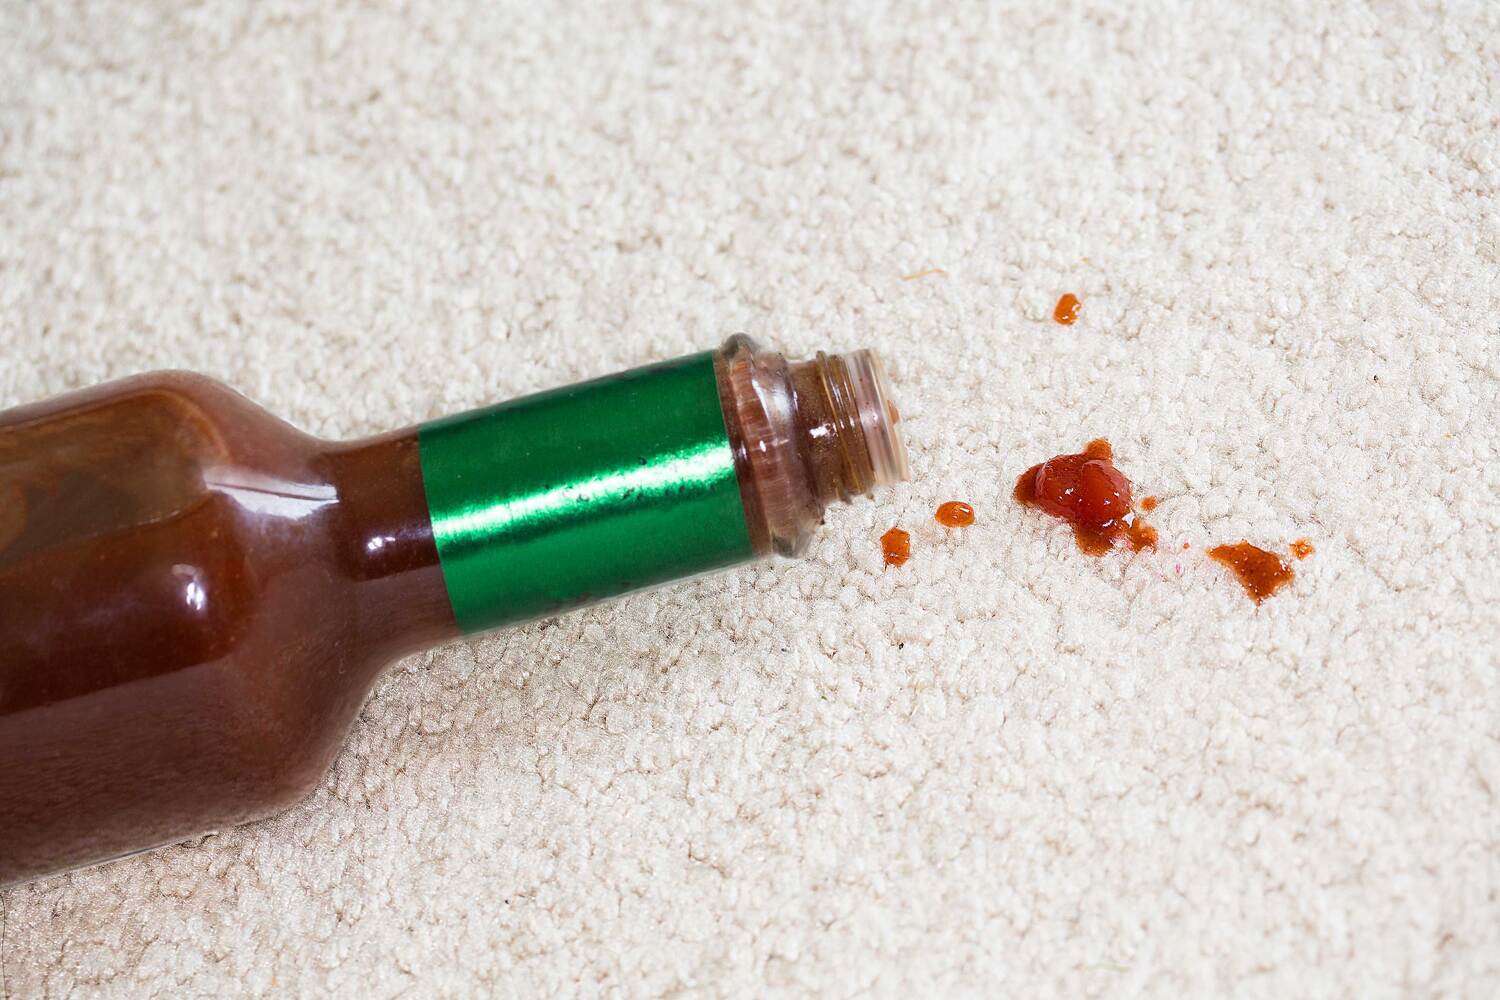 How To Clean Hot Sauce Out Of A Carpet